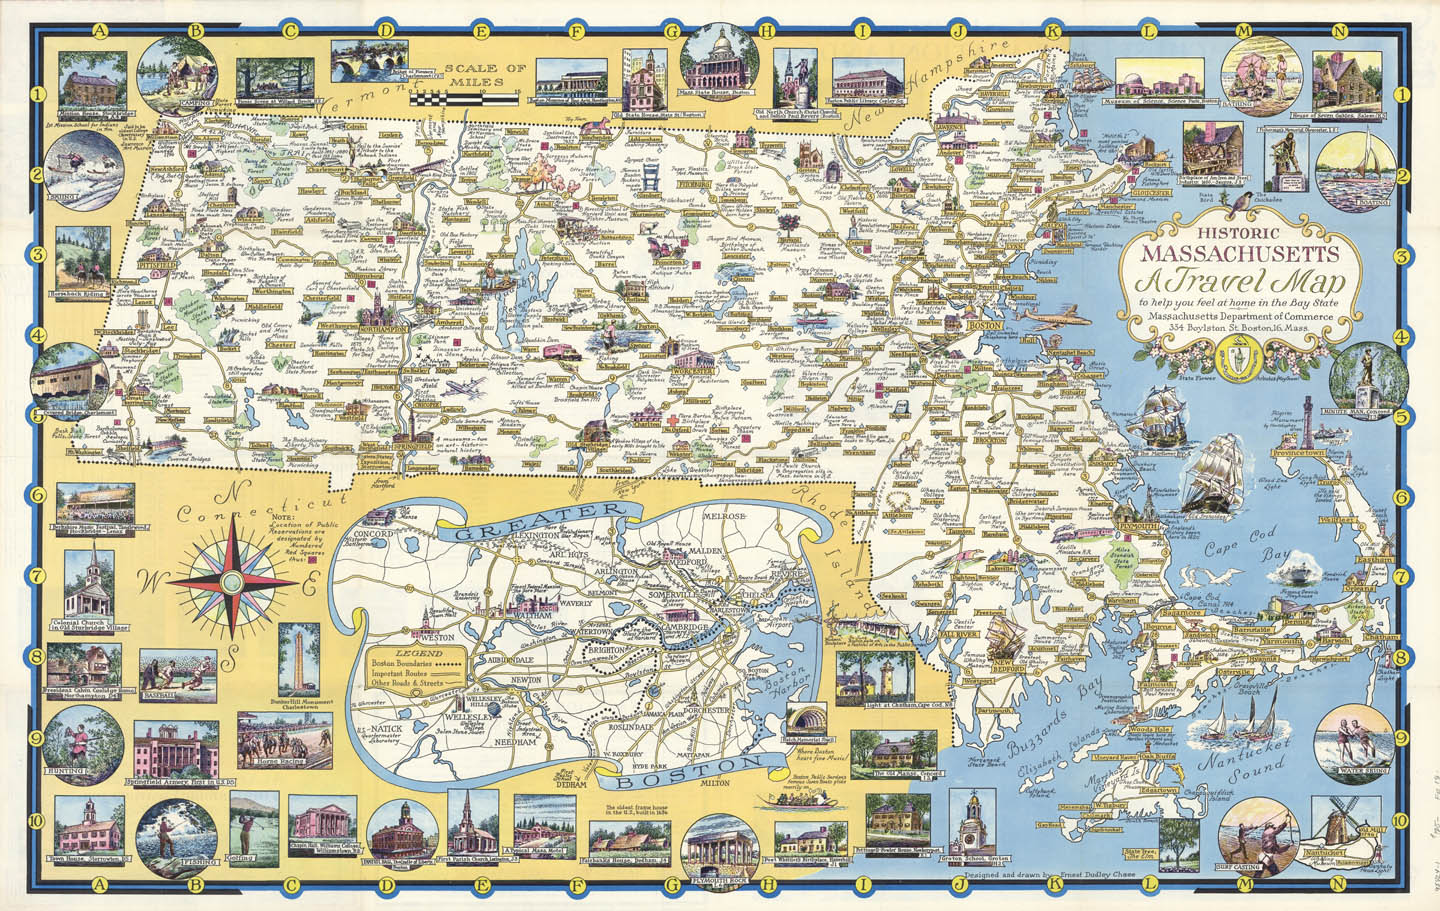 A World of Fun and Relaxation - Massachusetts The Historic Vacationland. A Travel Map to help you feel at home in the Bay State!